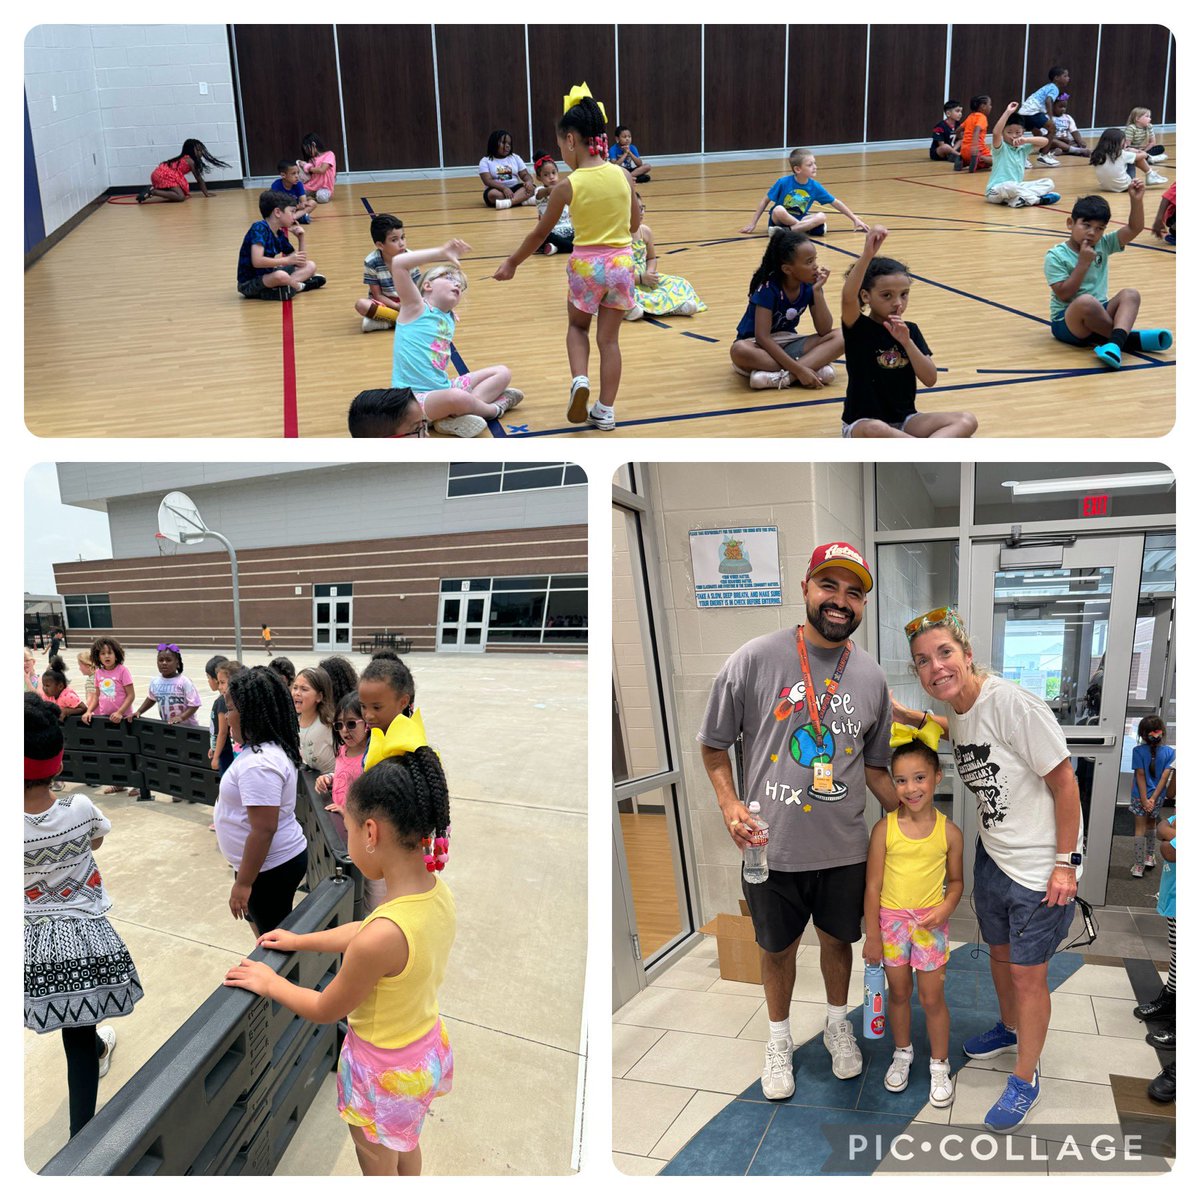 We enjoyed having our “assistant coach” for the 1/2 day helping with our @HumbleISD_CE PE classes today! Handing out bulldogs bucks and manning the gate for Gaga ball were among several duties she masterfully performed for our Bulldogs! @StephenCedillo ❤️🚂❤️